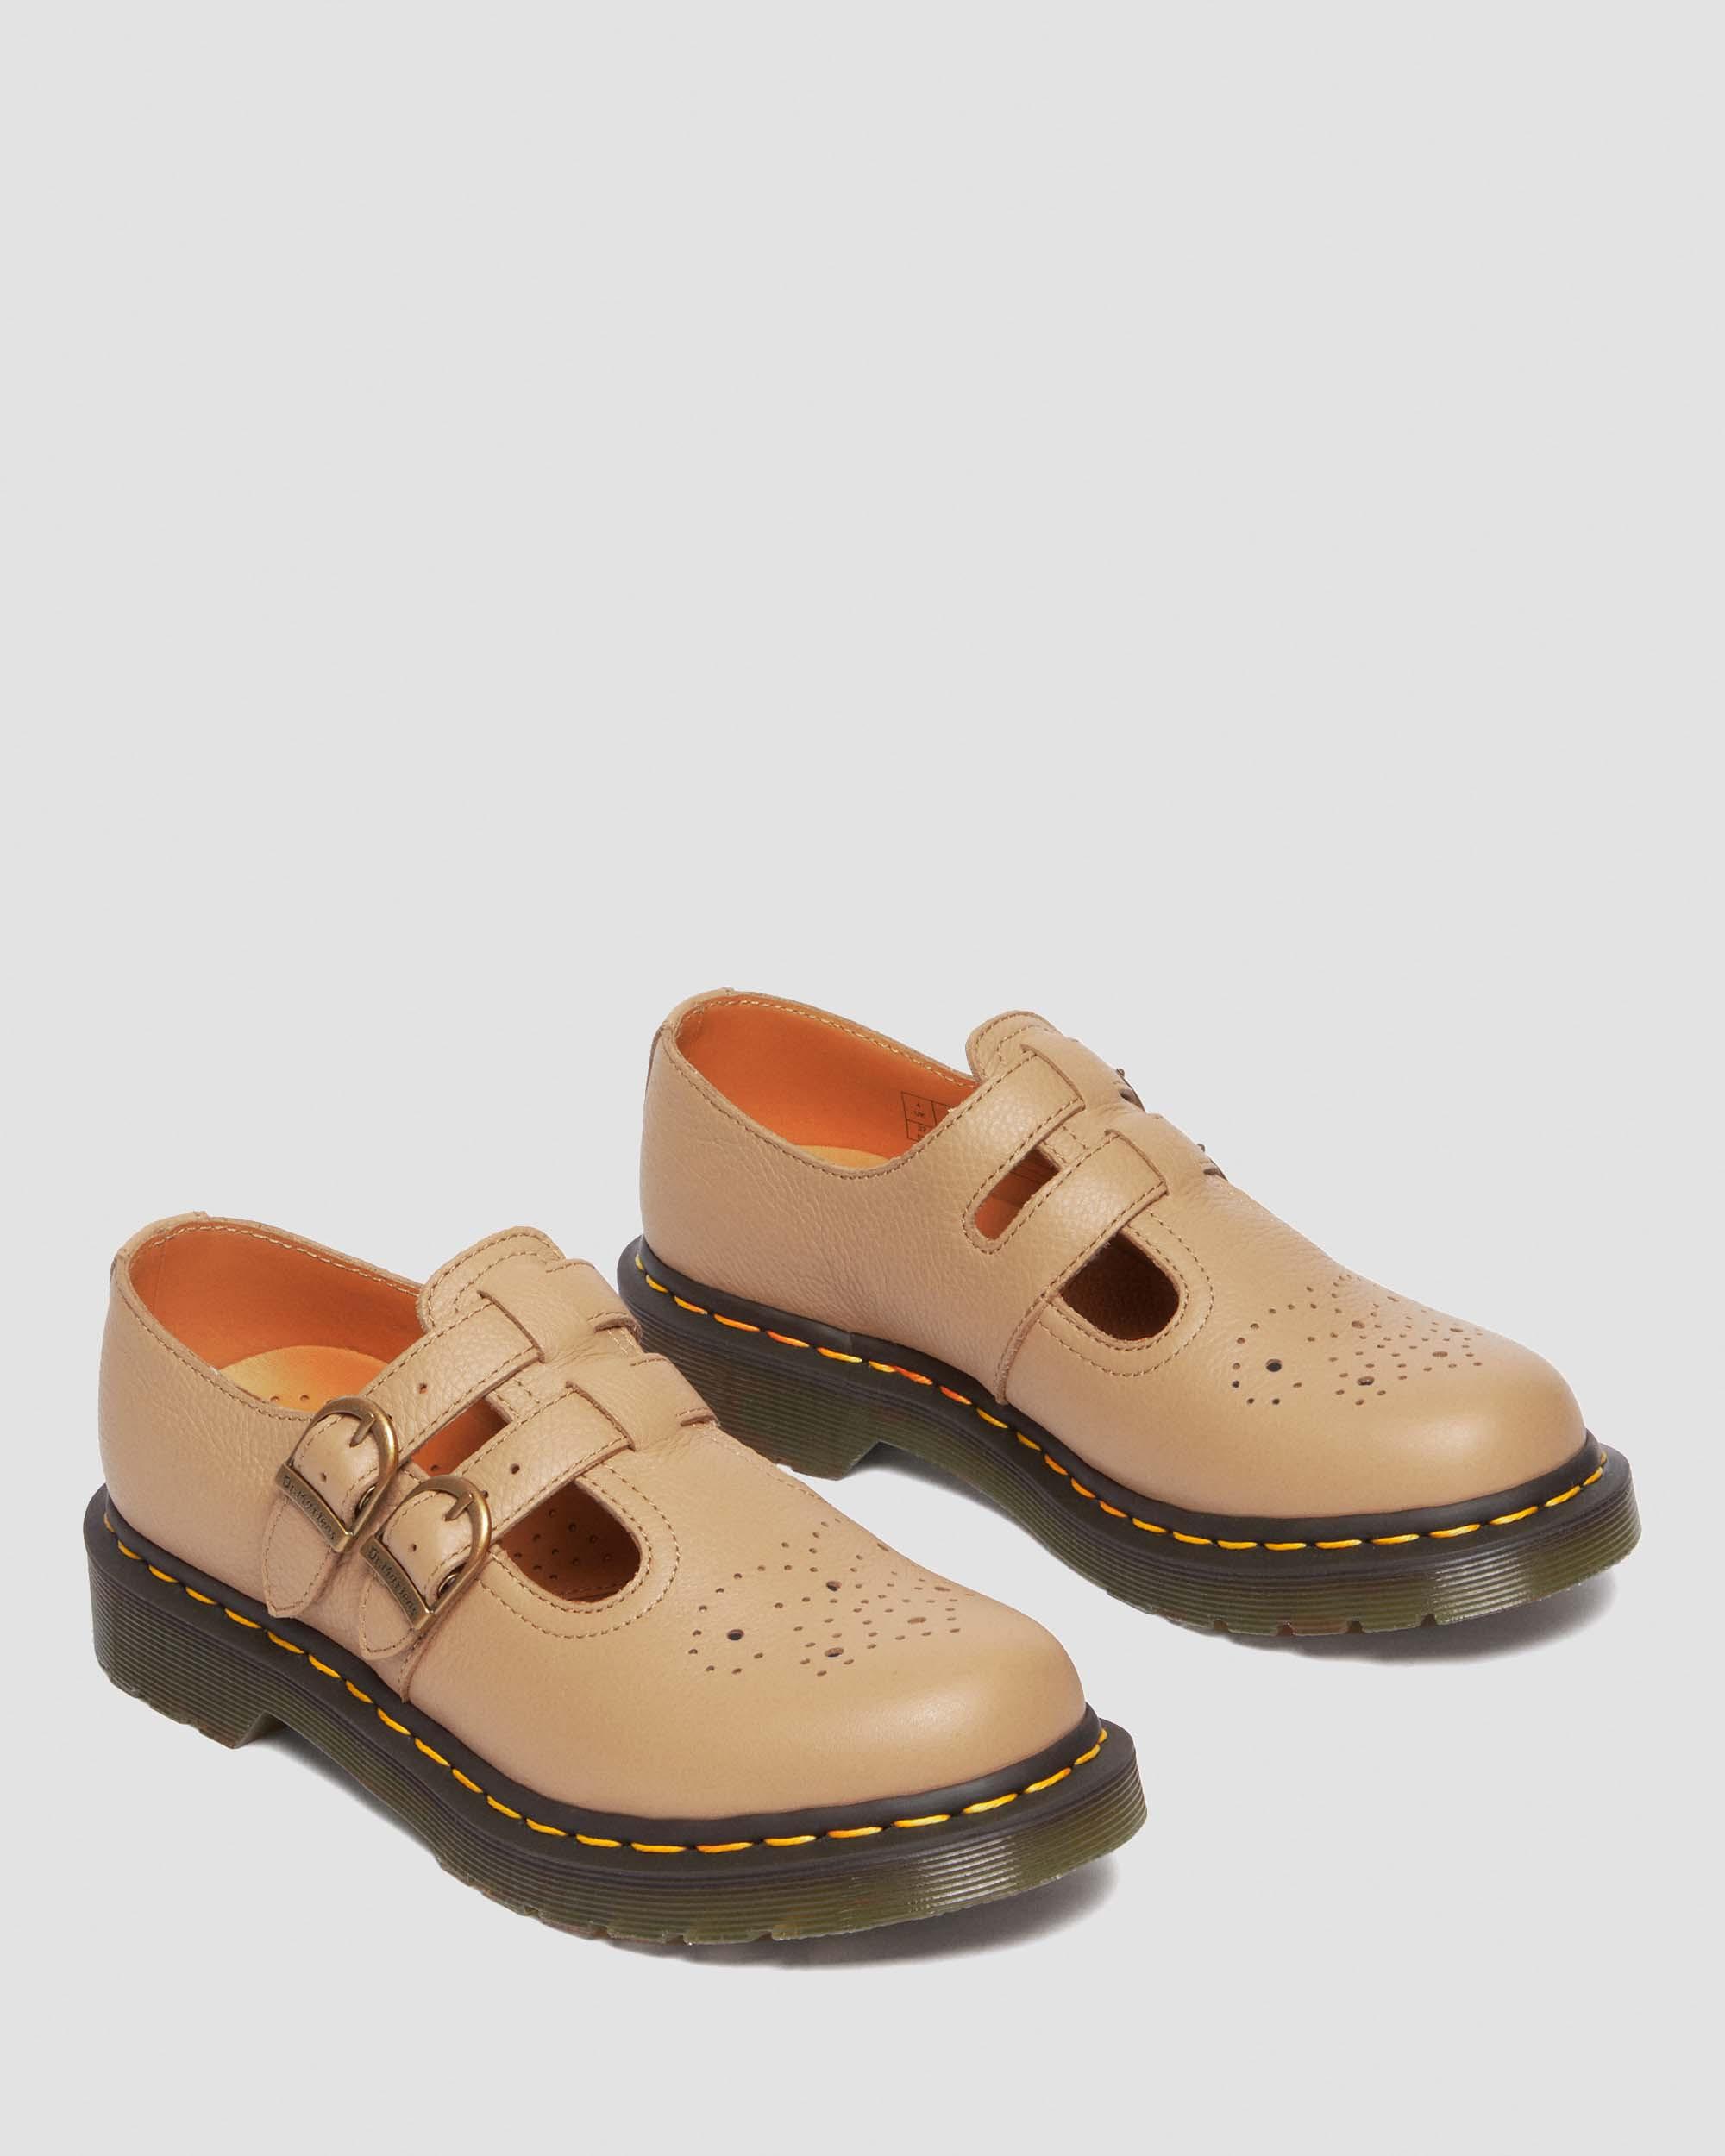 8065 Mary Jane Virginia Leather Shoes in Savannah Tan